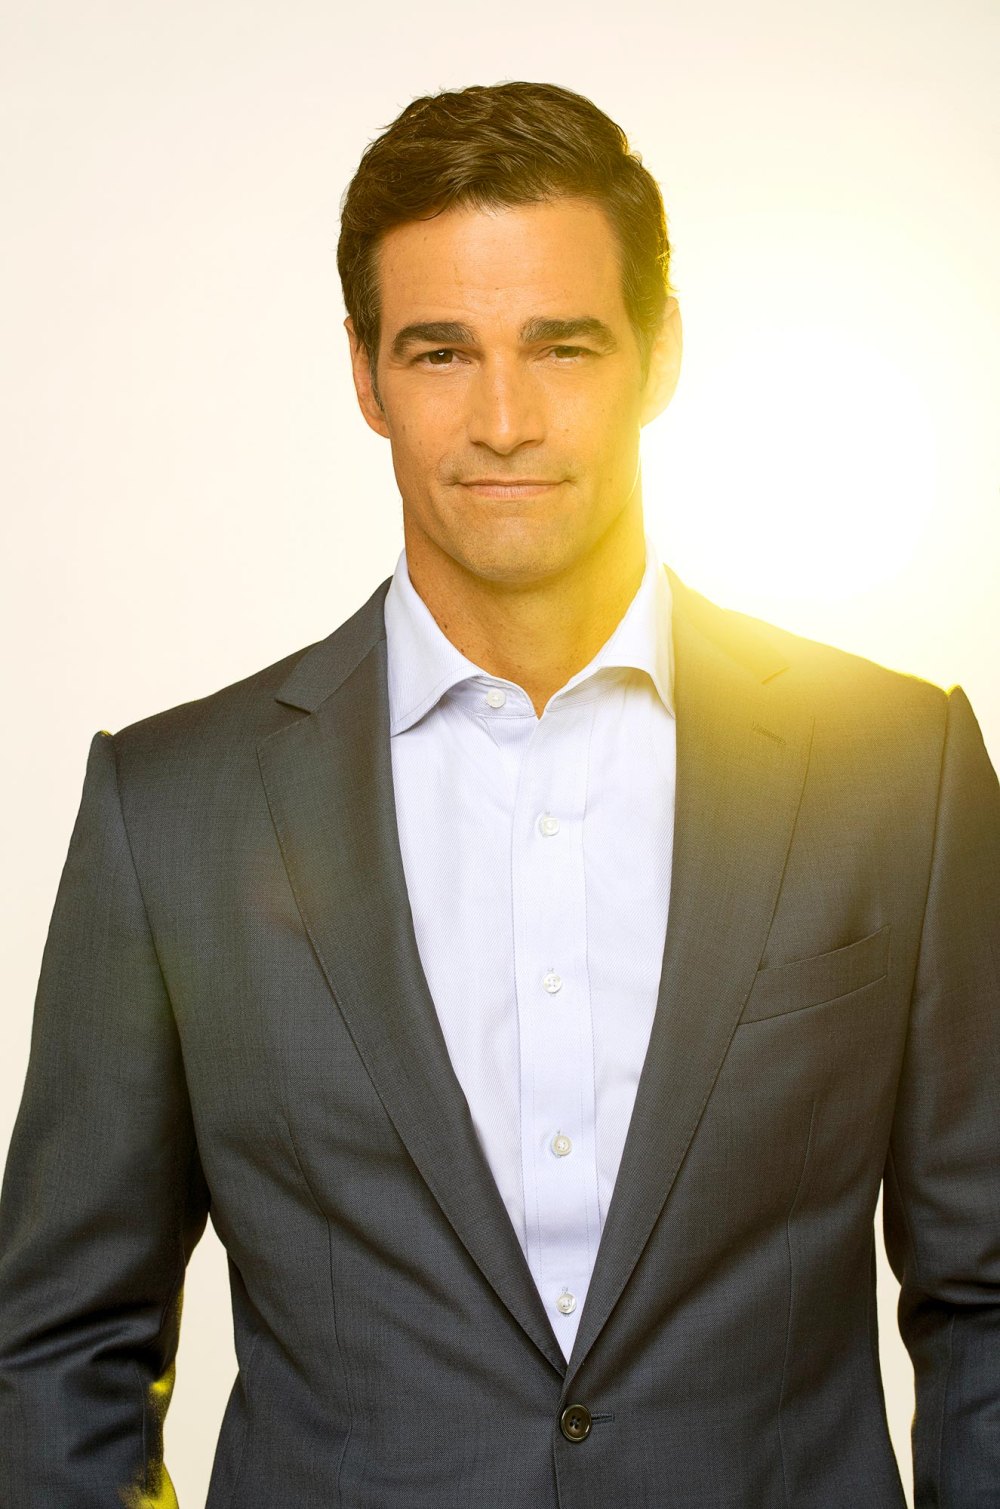 ABC News Meteorologist Rob Marciano Fired After a Nearly Decade at the Network 415